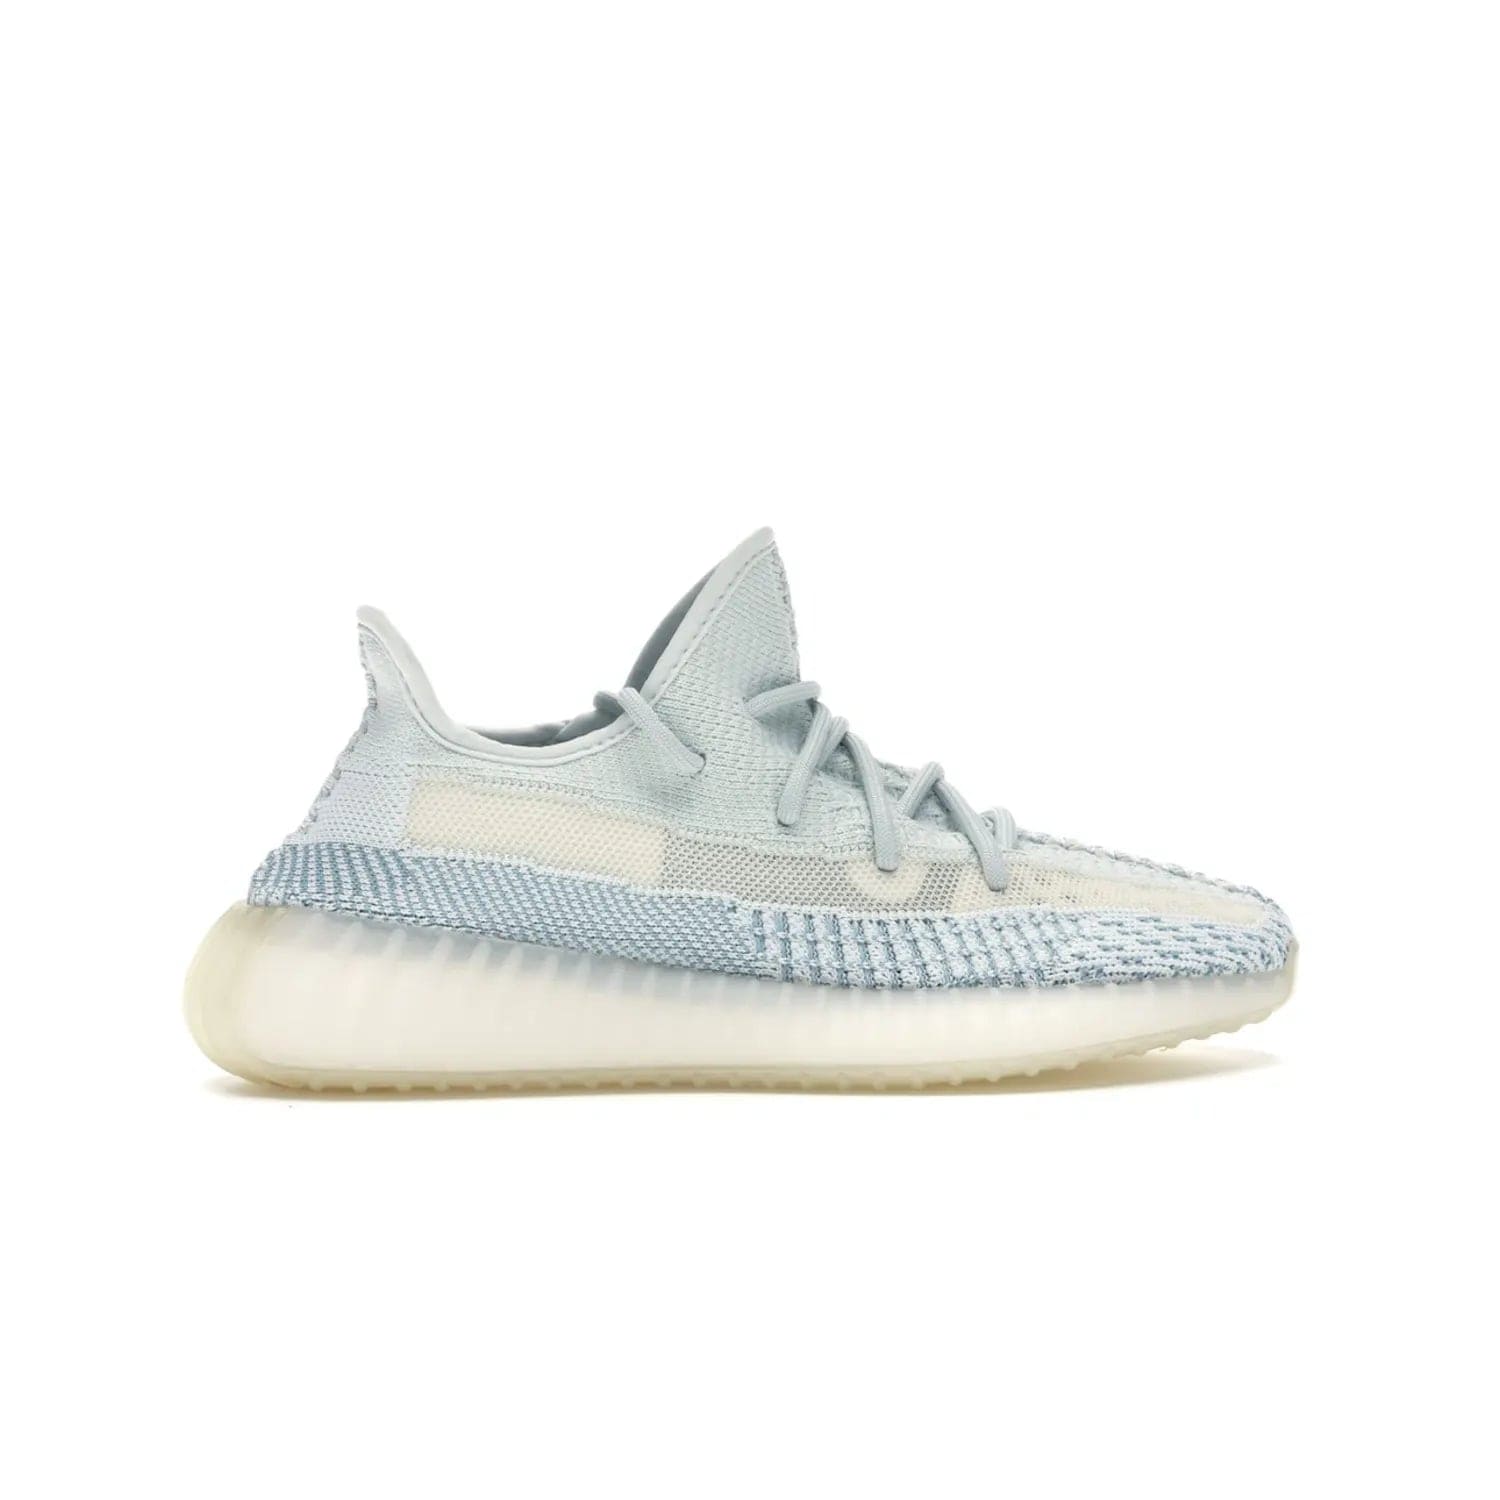 adidas Yeezy Boost 350 V2 Cloud White (Non-Reflective) - Image 36 - Only at www.BallersClubKickz.com - Uniquely designed adidas Yeezy Boost 350 V2 Cloud White (Non-Reflective) with a Primeknit upper in shades of cream and blue with a contrasting hard sole. A fashion-forward sneaker with a transparent strip and blue-and-white patterns.